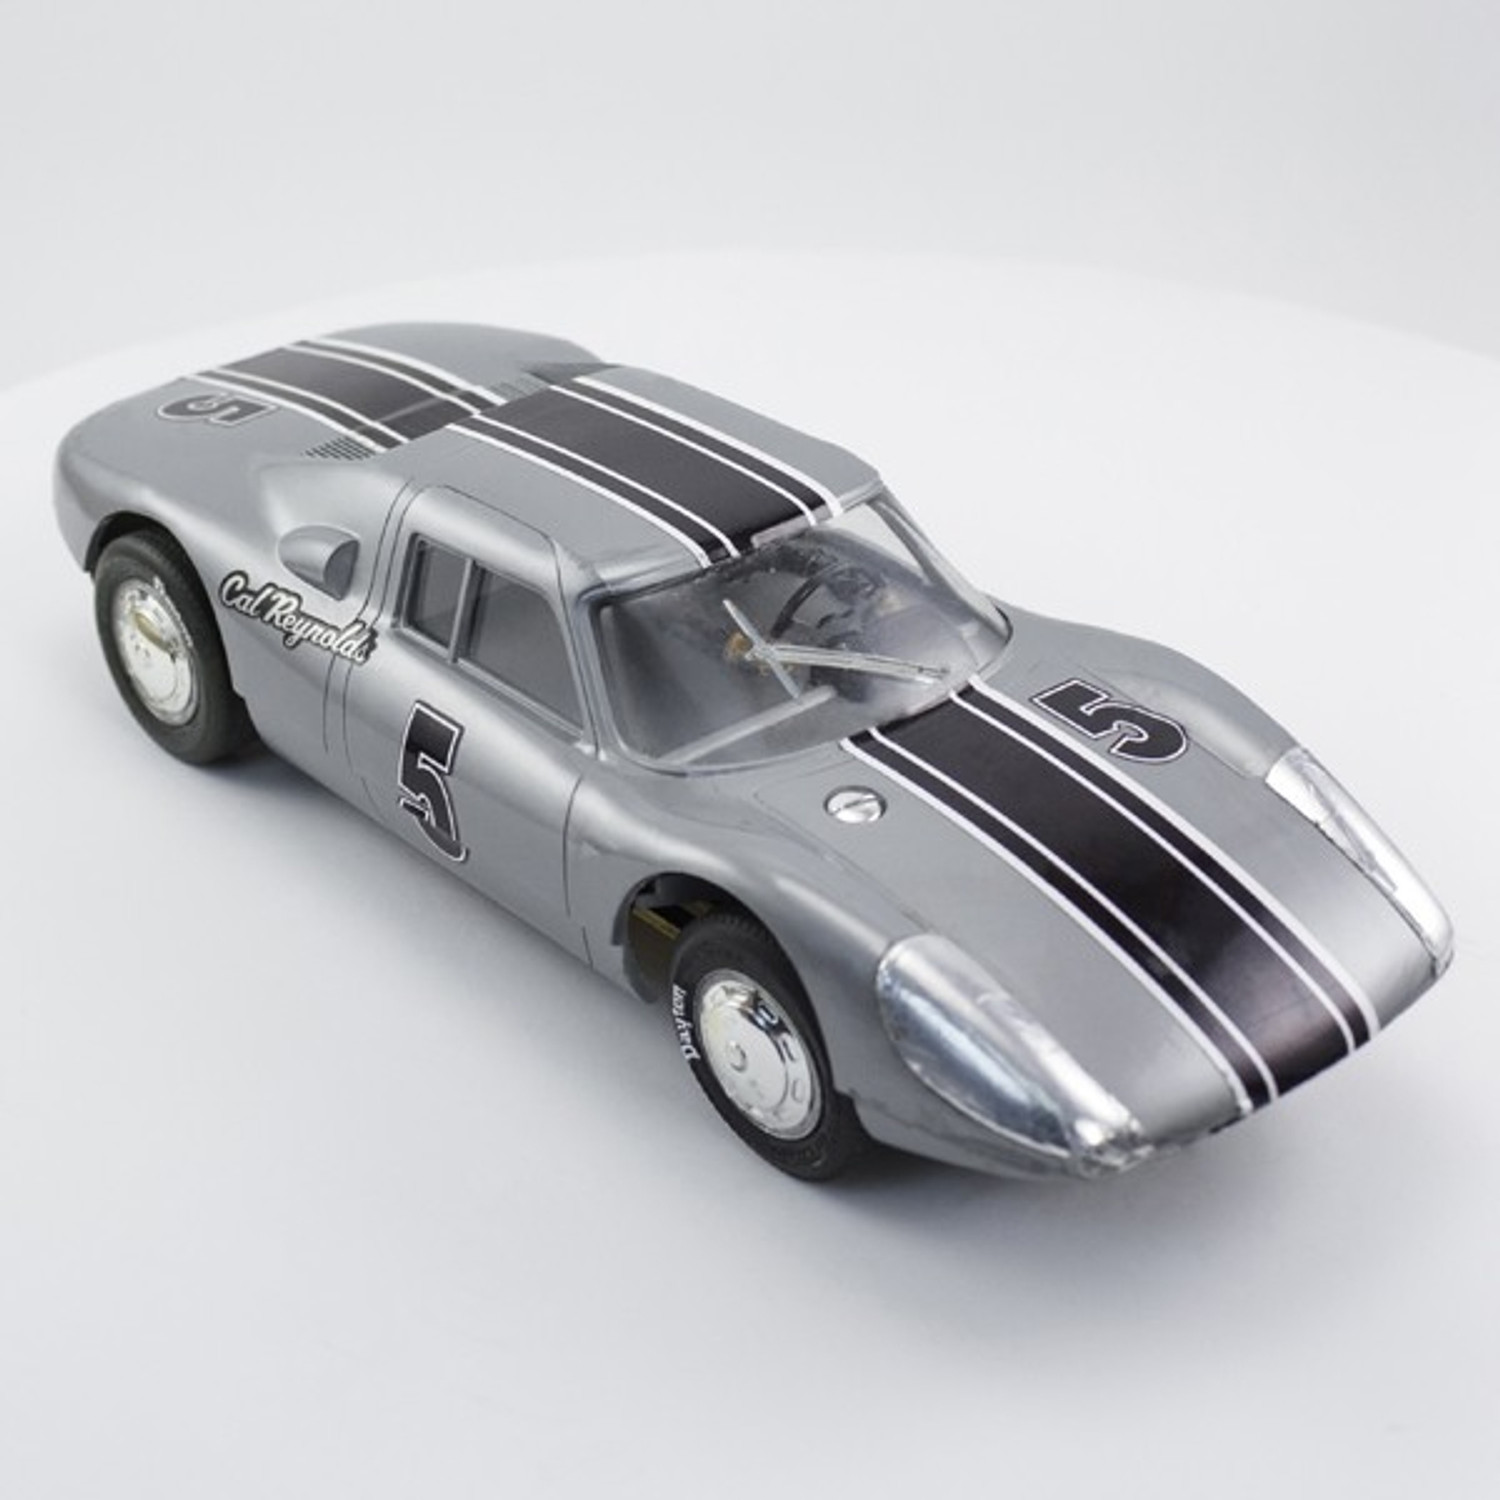 Stock Number: 16133 Grey Porsche 904 by Revell